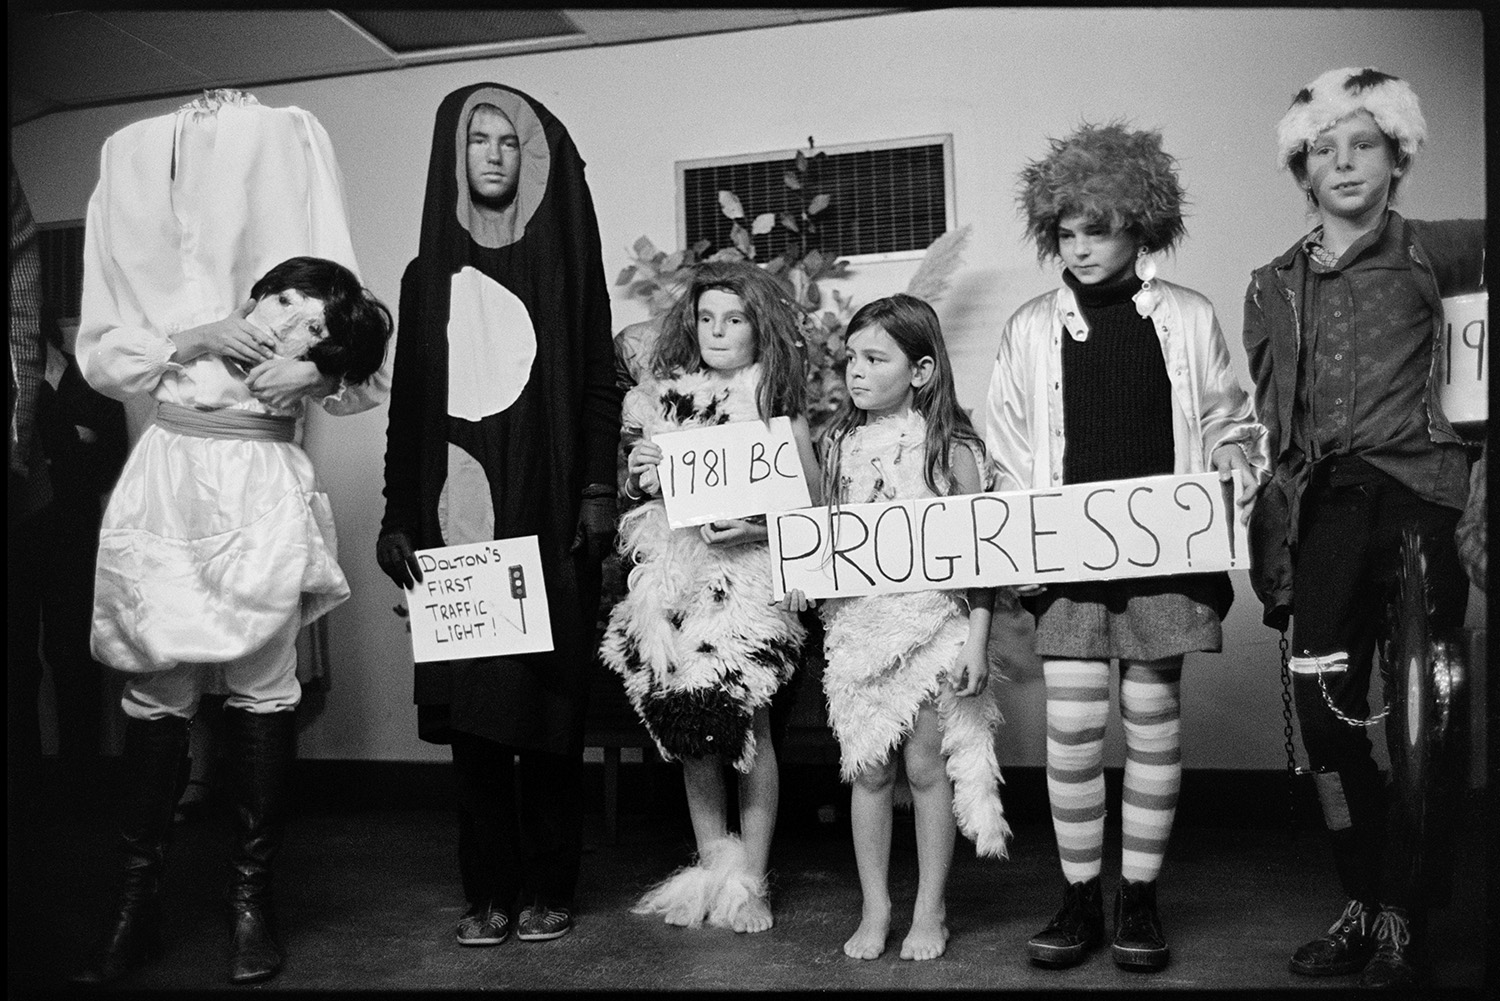 Fancy dress competition in village hall, spectators, queen and crown on cushion. 
[Children at  a fancy dress competition for Dolton Carnvial, in Dolton Village Hall. One child is dressed as a headles sperson and another is a traffic light. Four children are dressed as the stages of man from prehistoric man to the present day, and holding the sing 'Progress?'.]